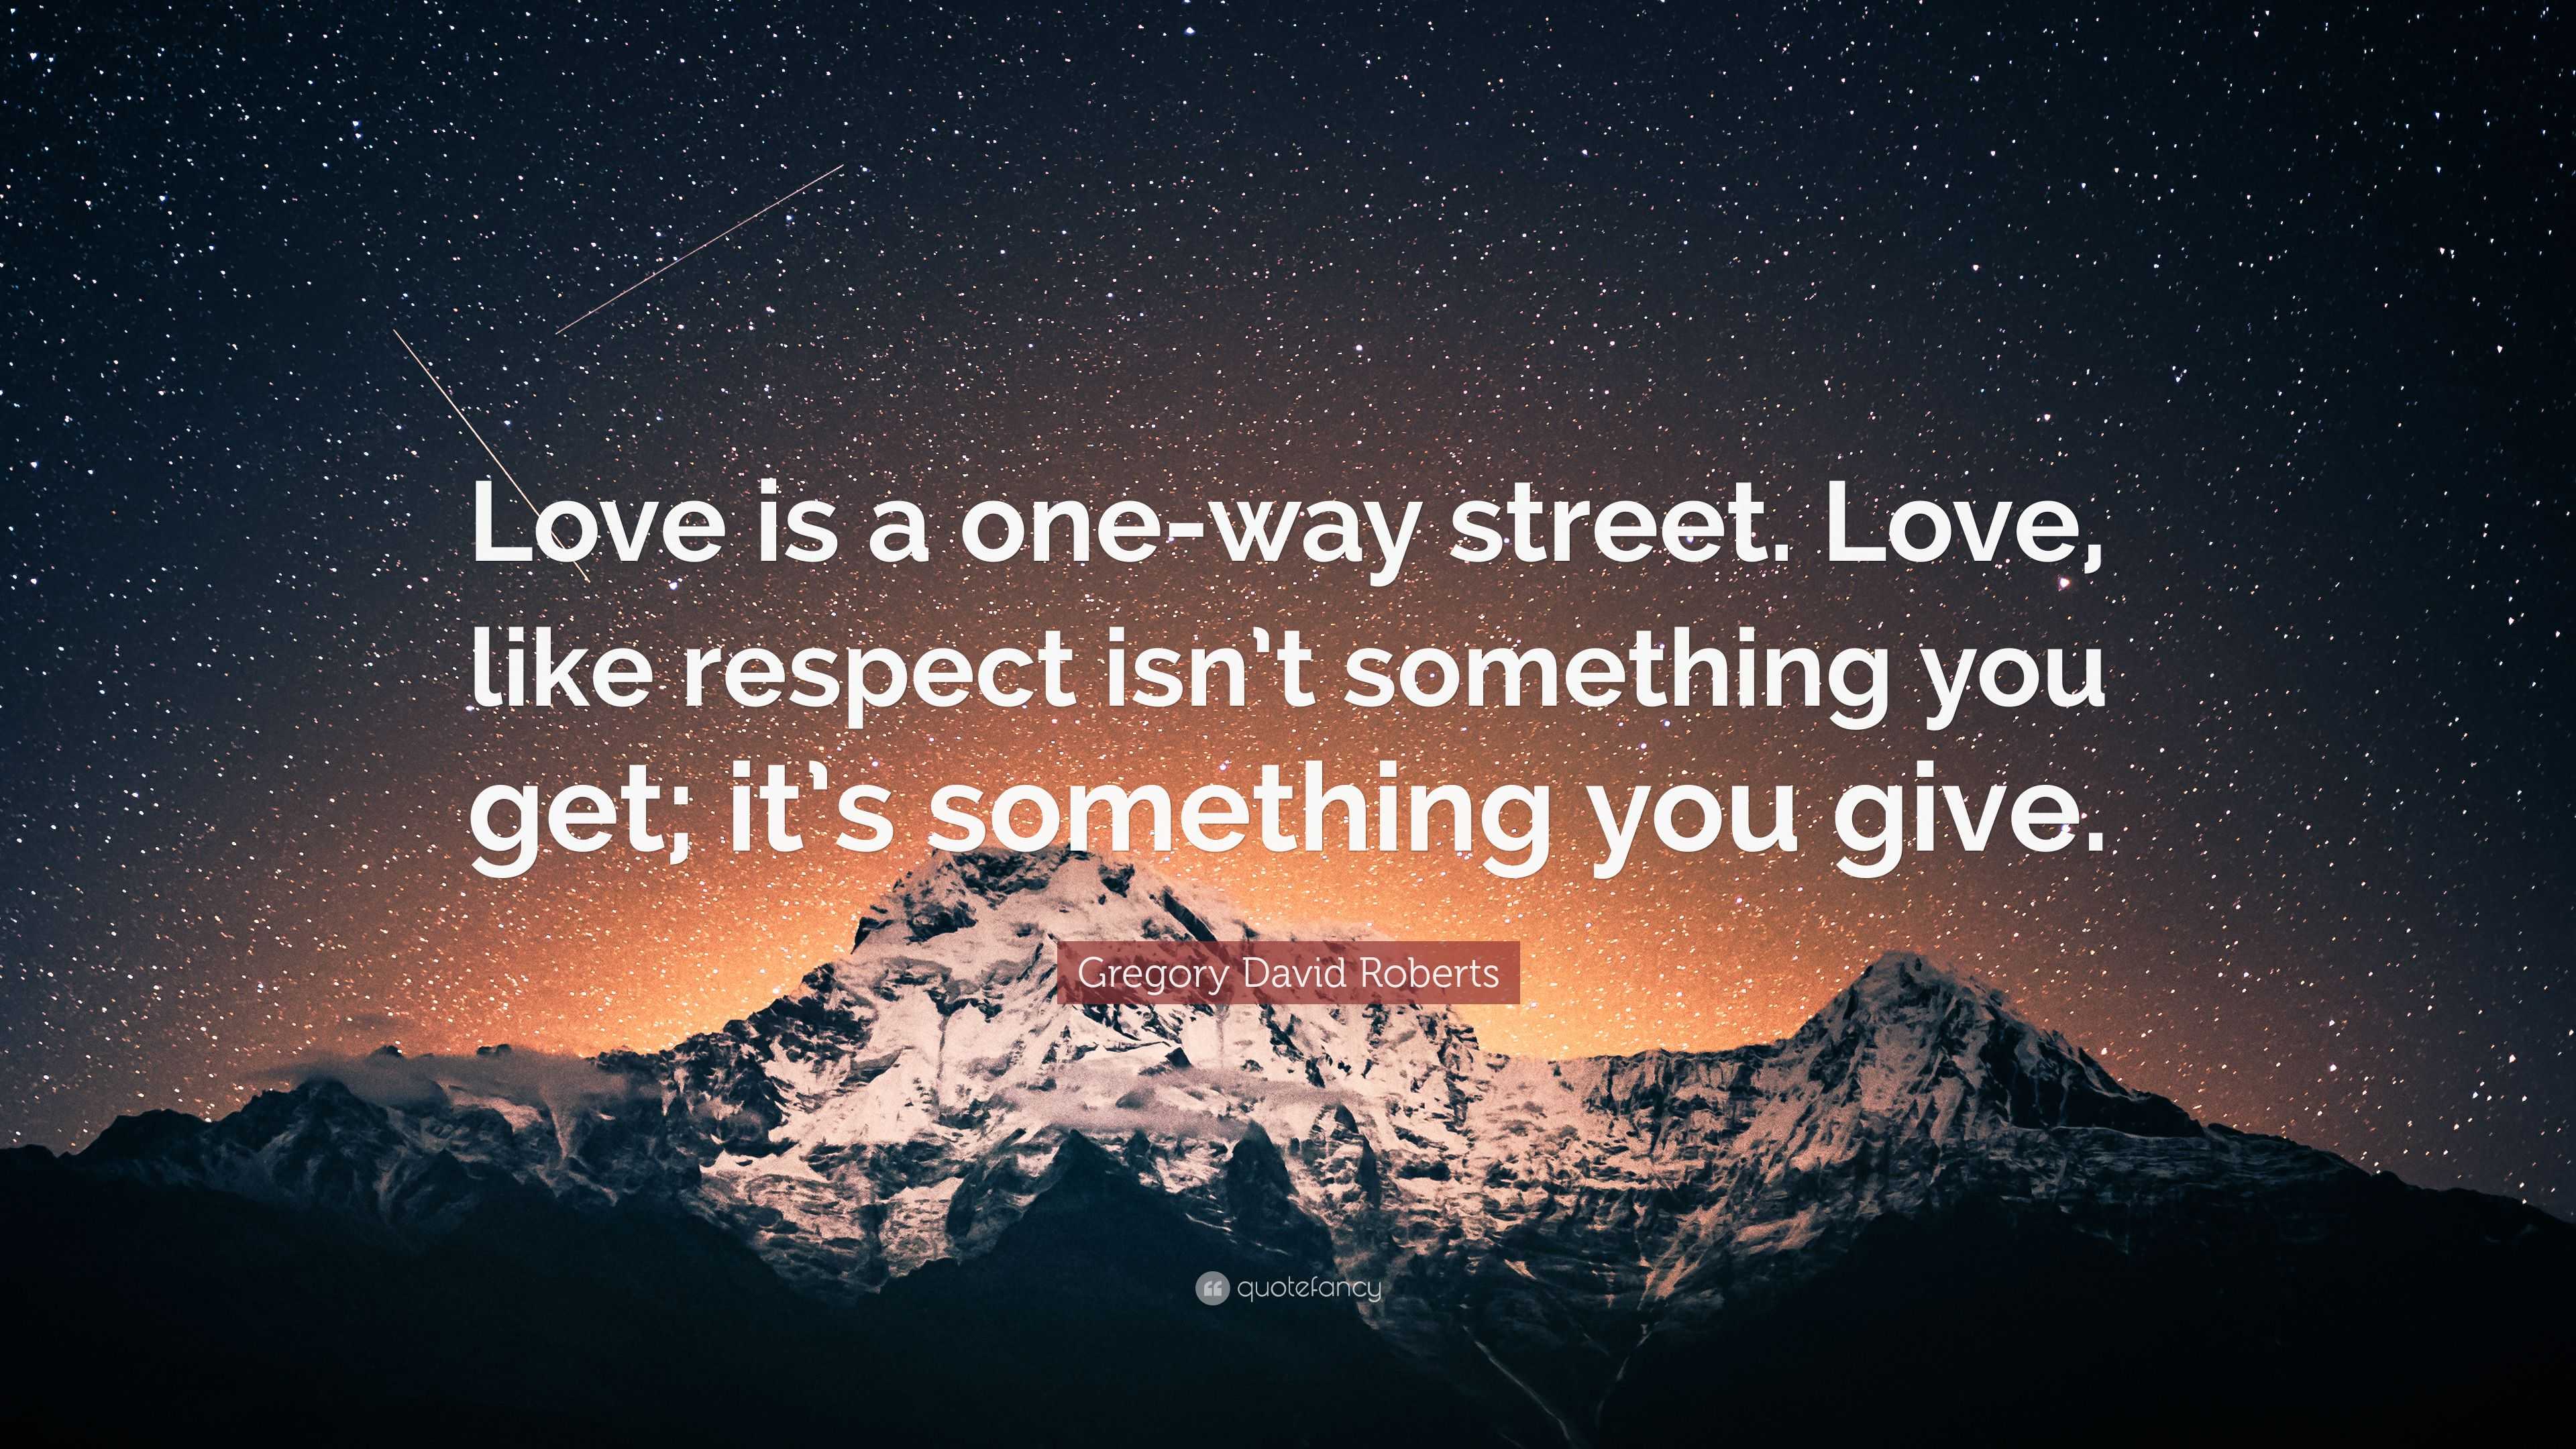 Gregory David Roberts Quote “Love is a one way street Love